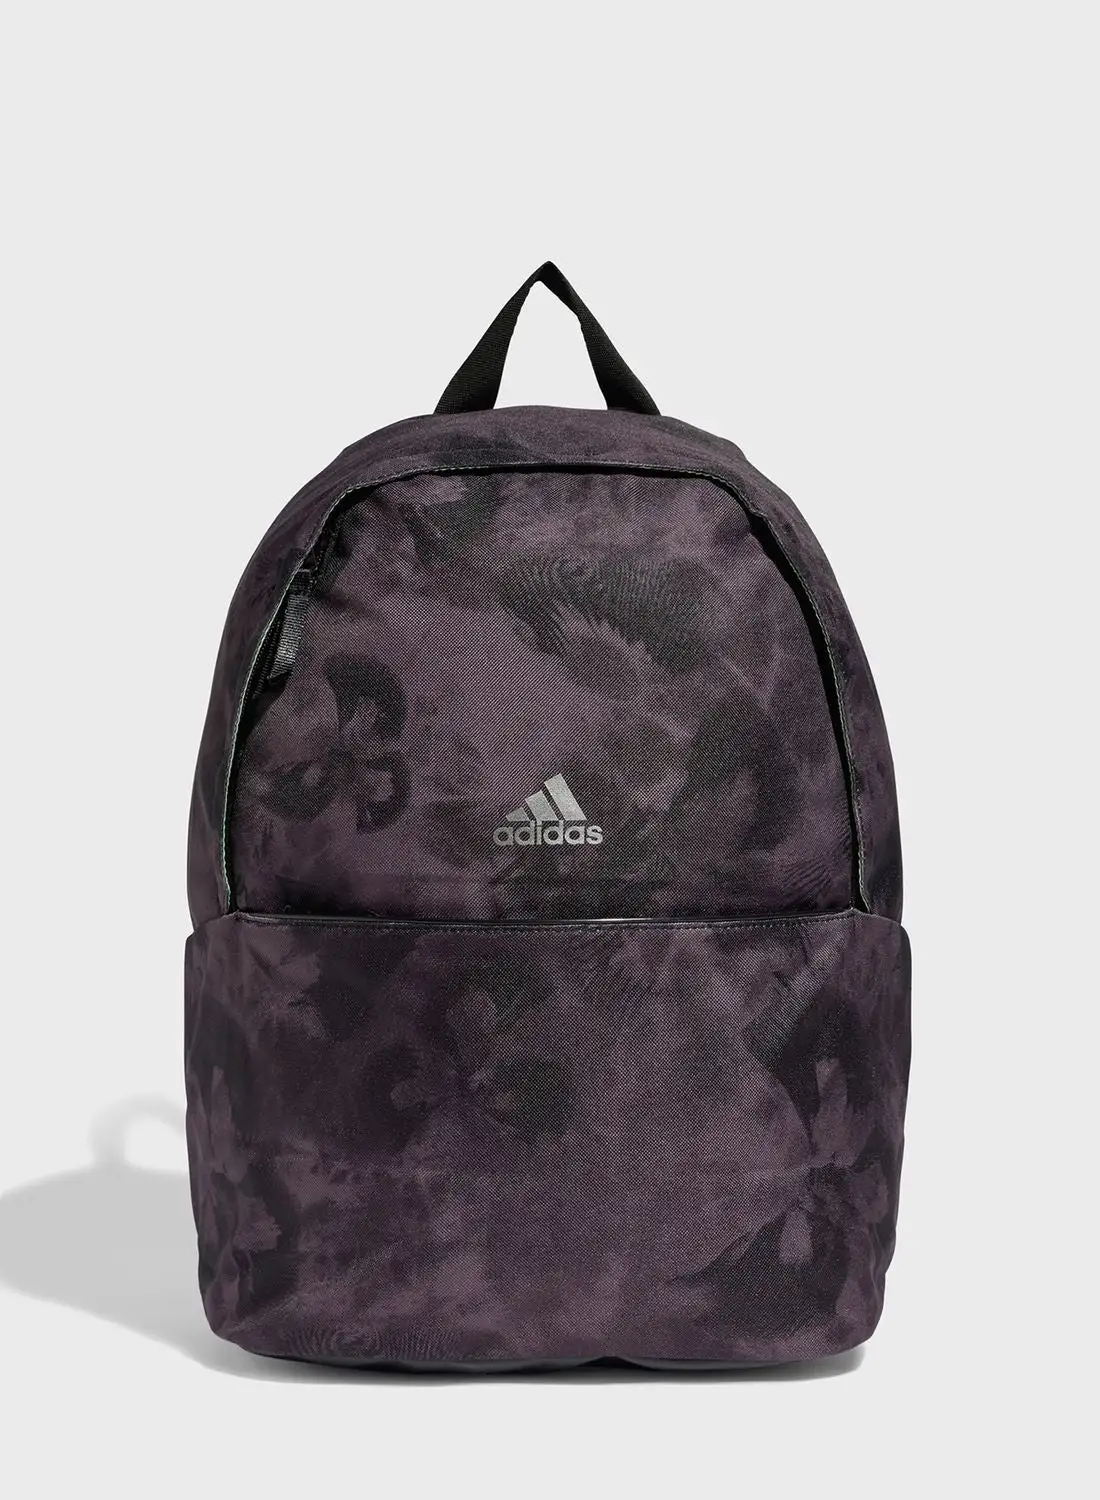 Adidas All Over Printed Gym Backpack